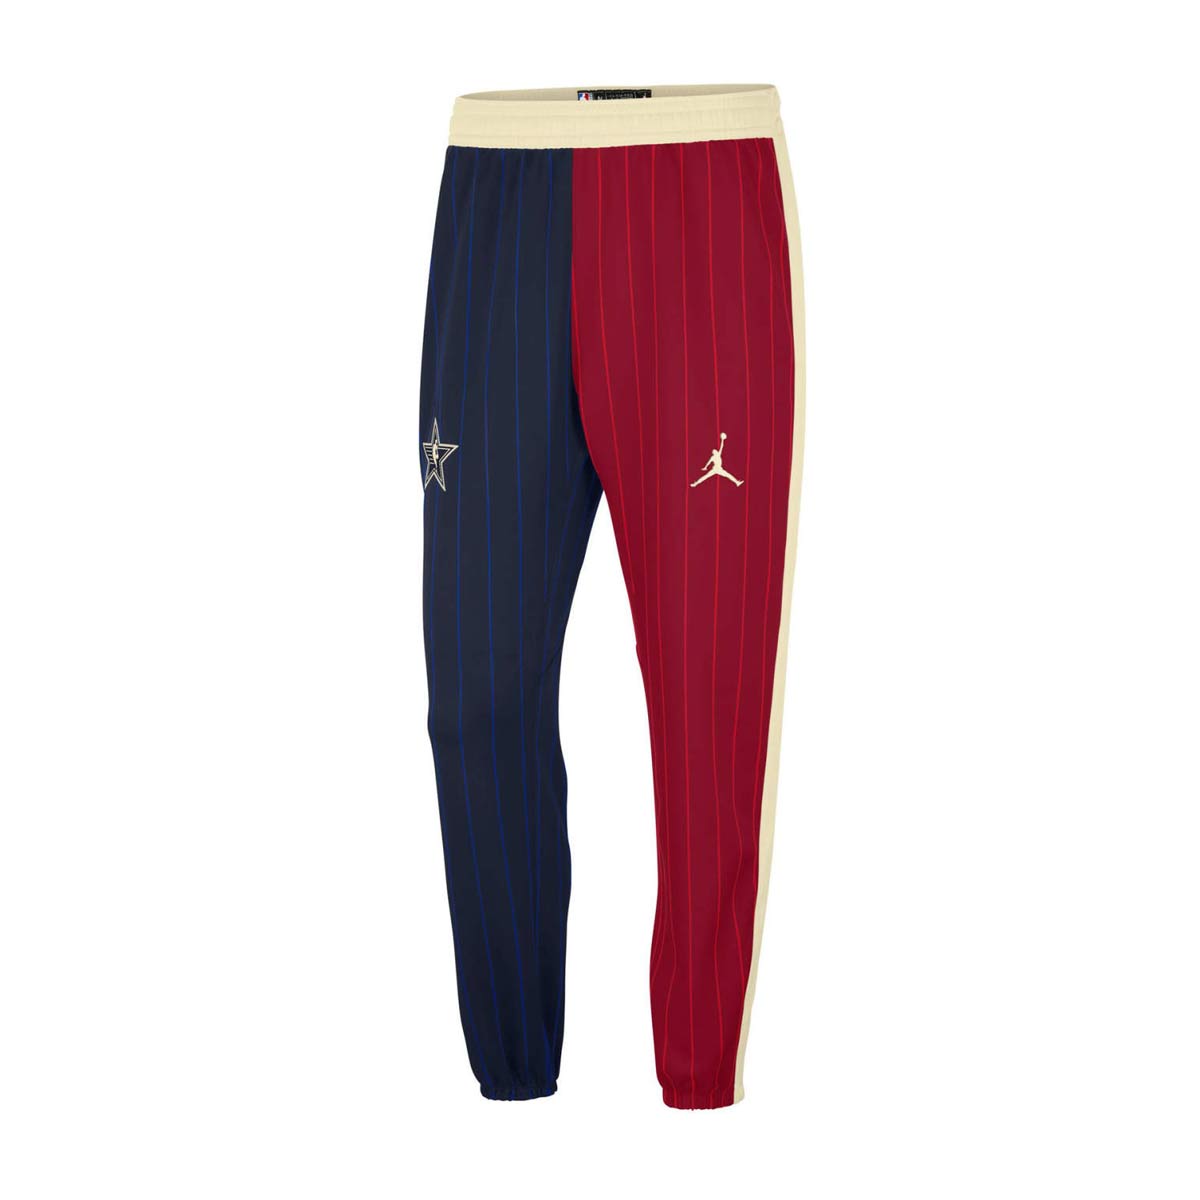 All Star Games Showtime Pant